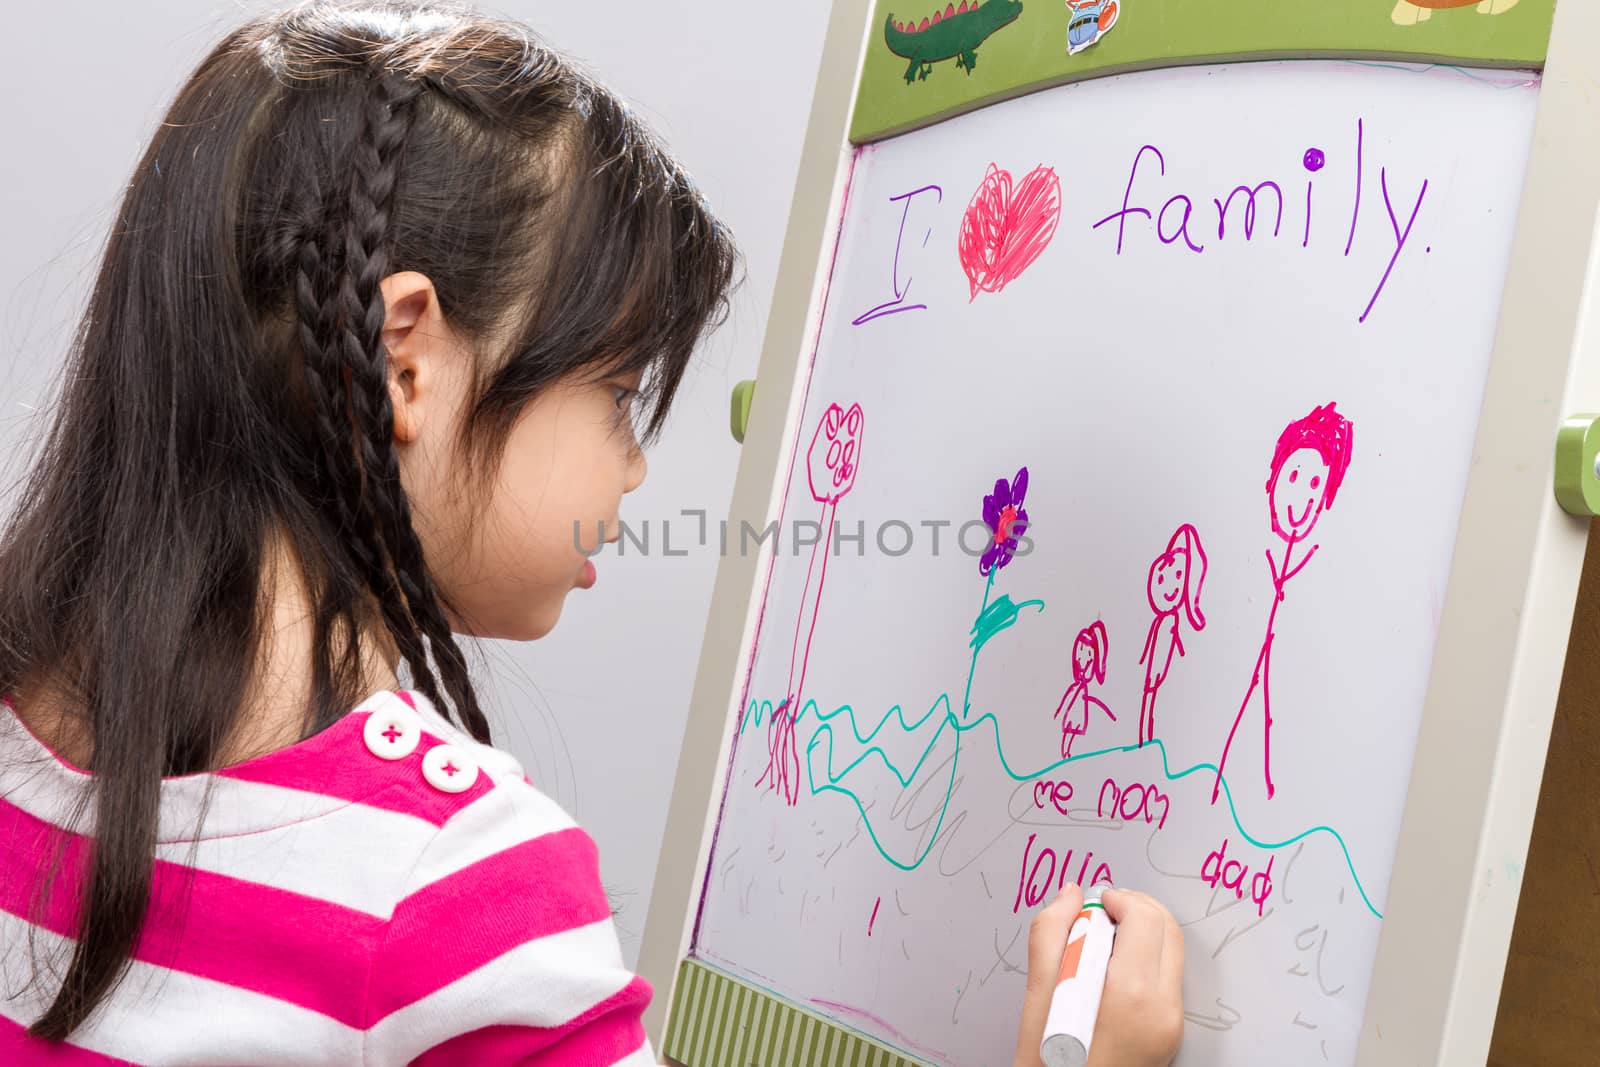 Kid drawing her family picture on whiteboard.